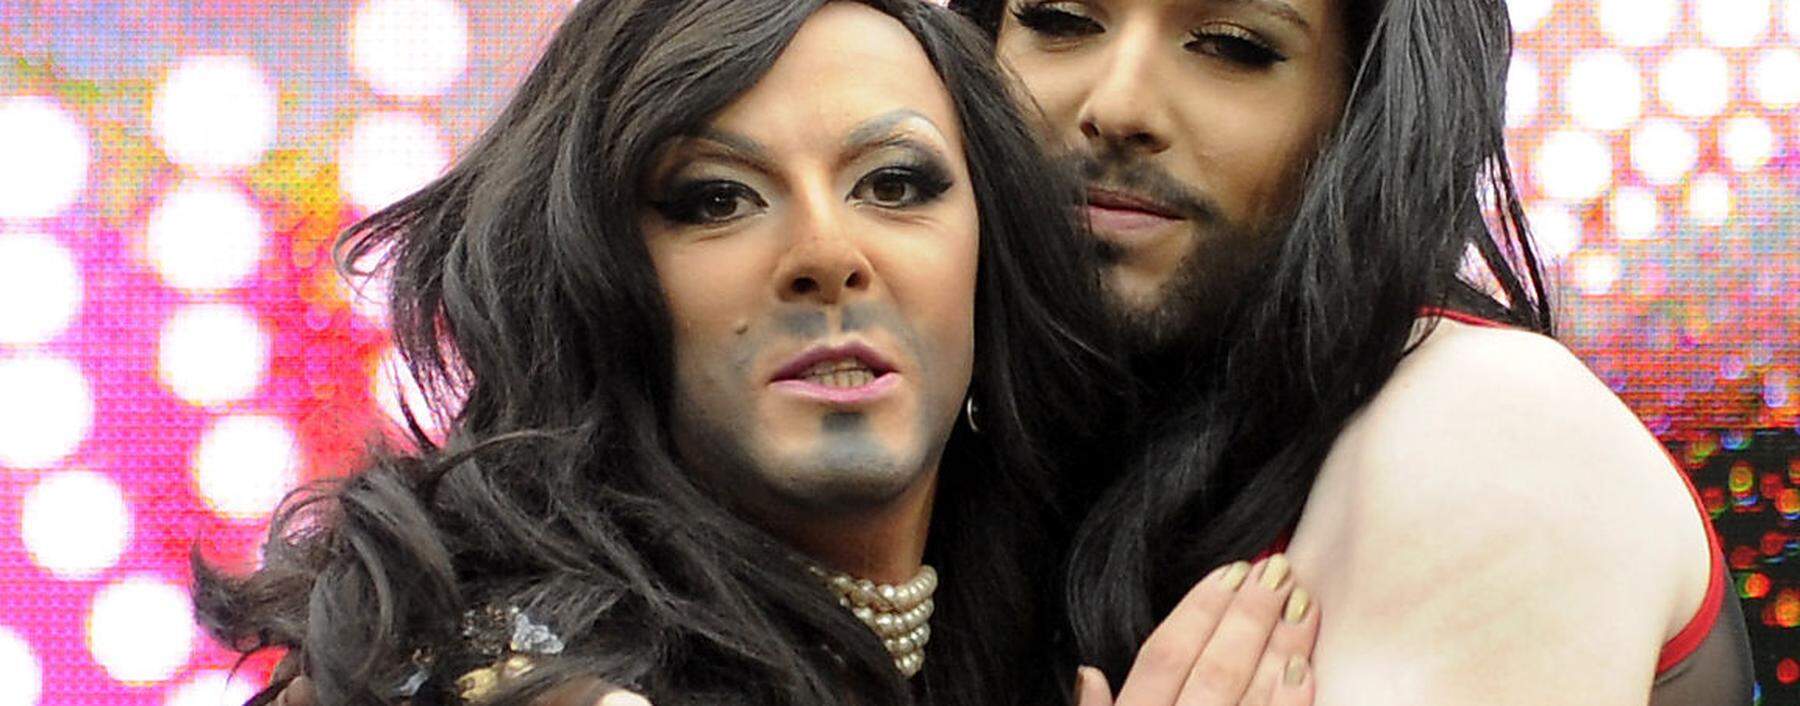 EUROVISION SONG CONTEST 2015: EUROVISION VILLAGE / 'CONCHITA-LOOKALIKE-CONTEST'